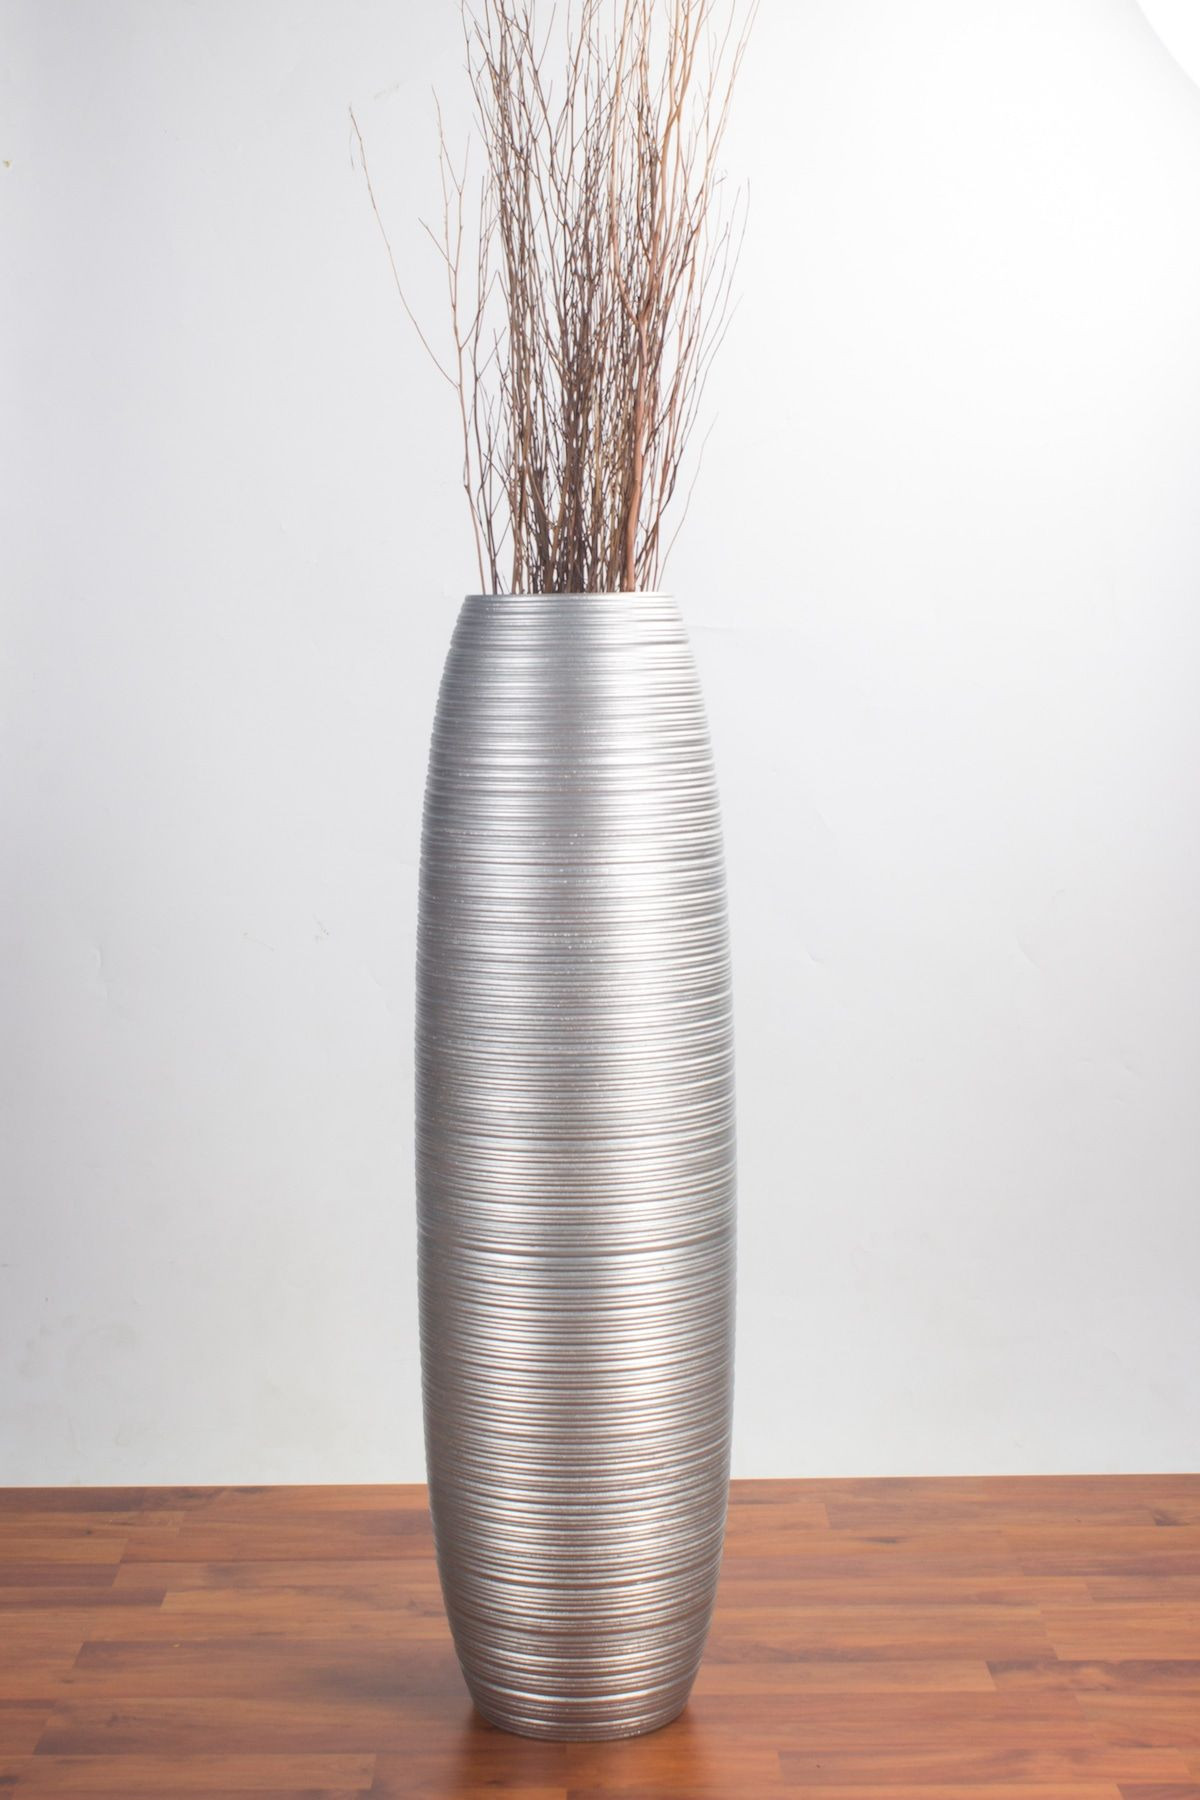 24 inch vases cheap of 24 inch vase stock sell wedding decor awesome h vases bud vase pertaining to 24 inch vase pictures tall floor vase 36 inches wood silver home pinterest of 24 inch